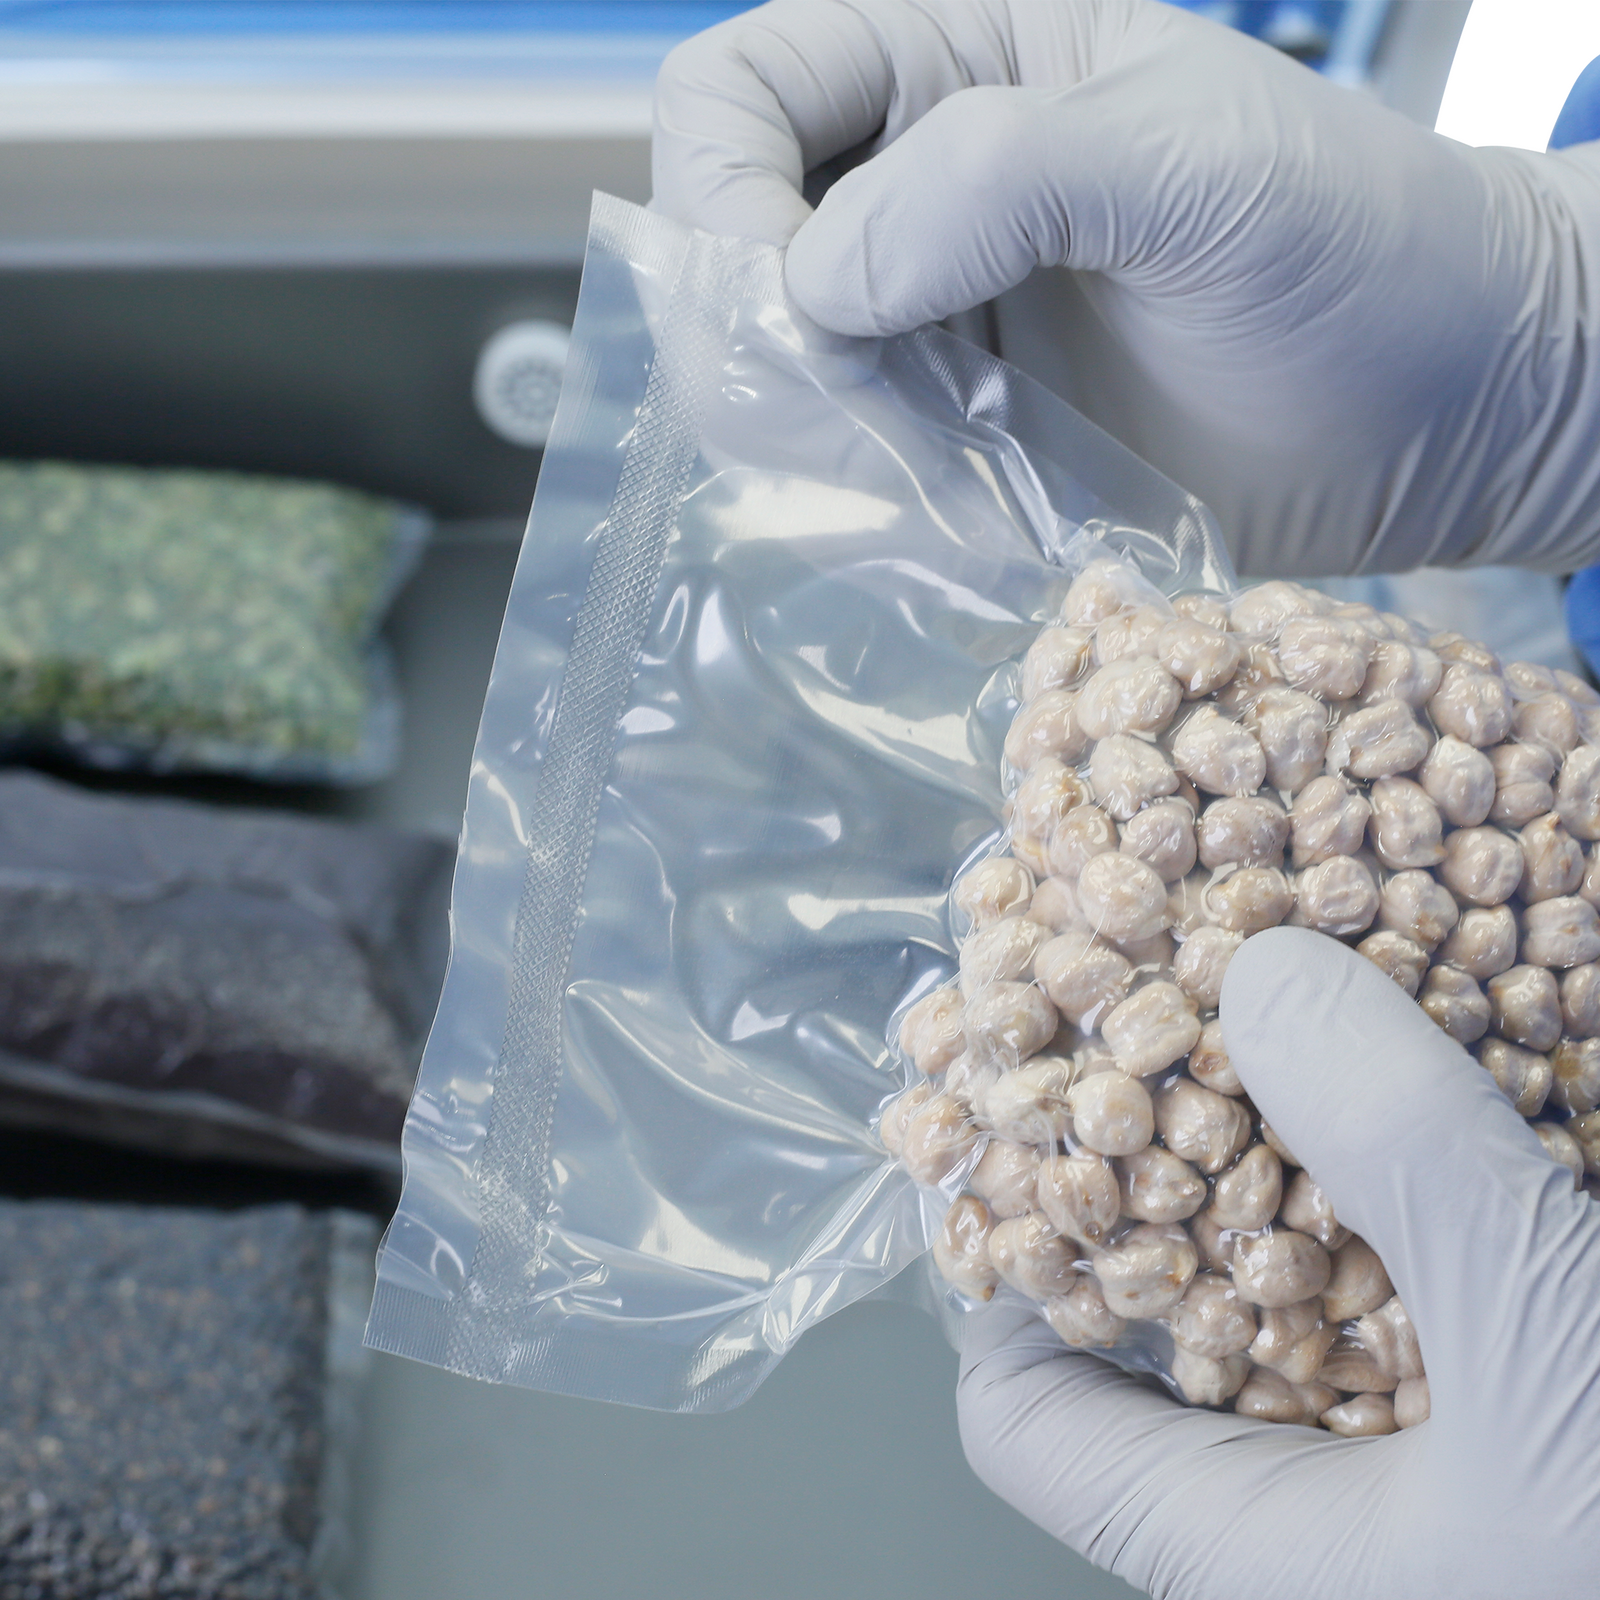 Person wearing nitrile gloves holding a bag with chick peas. He is showing the seal done by a Commercial single chamber JORES TECHNOLOGIES® vacuum sealer with dual seal bars